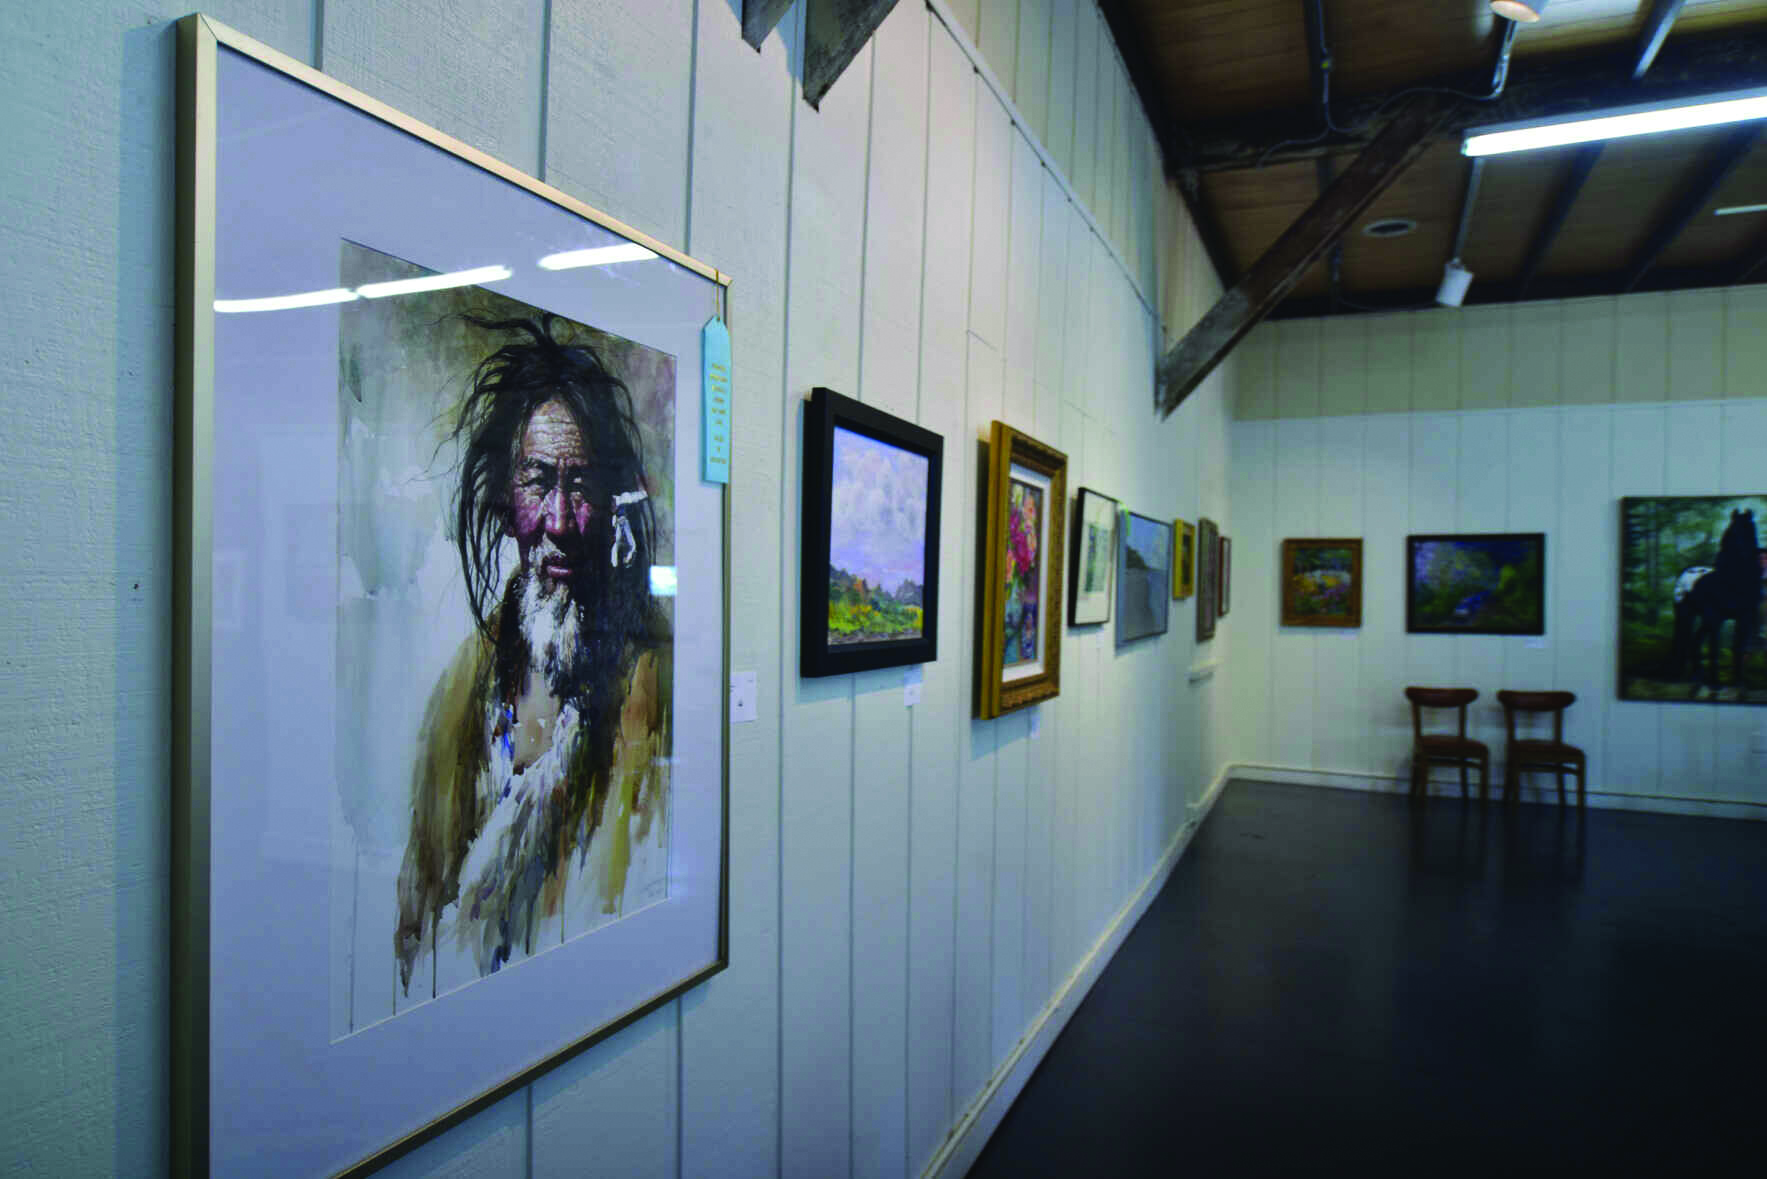 The Fine Arts and Photo exhibit can be seen at The Arts Depot, Abingdon, Virginia.